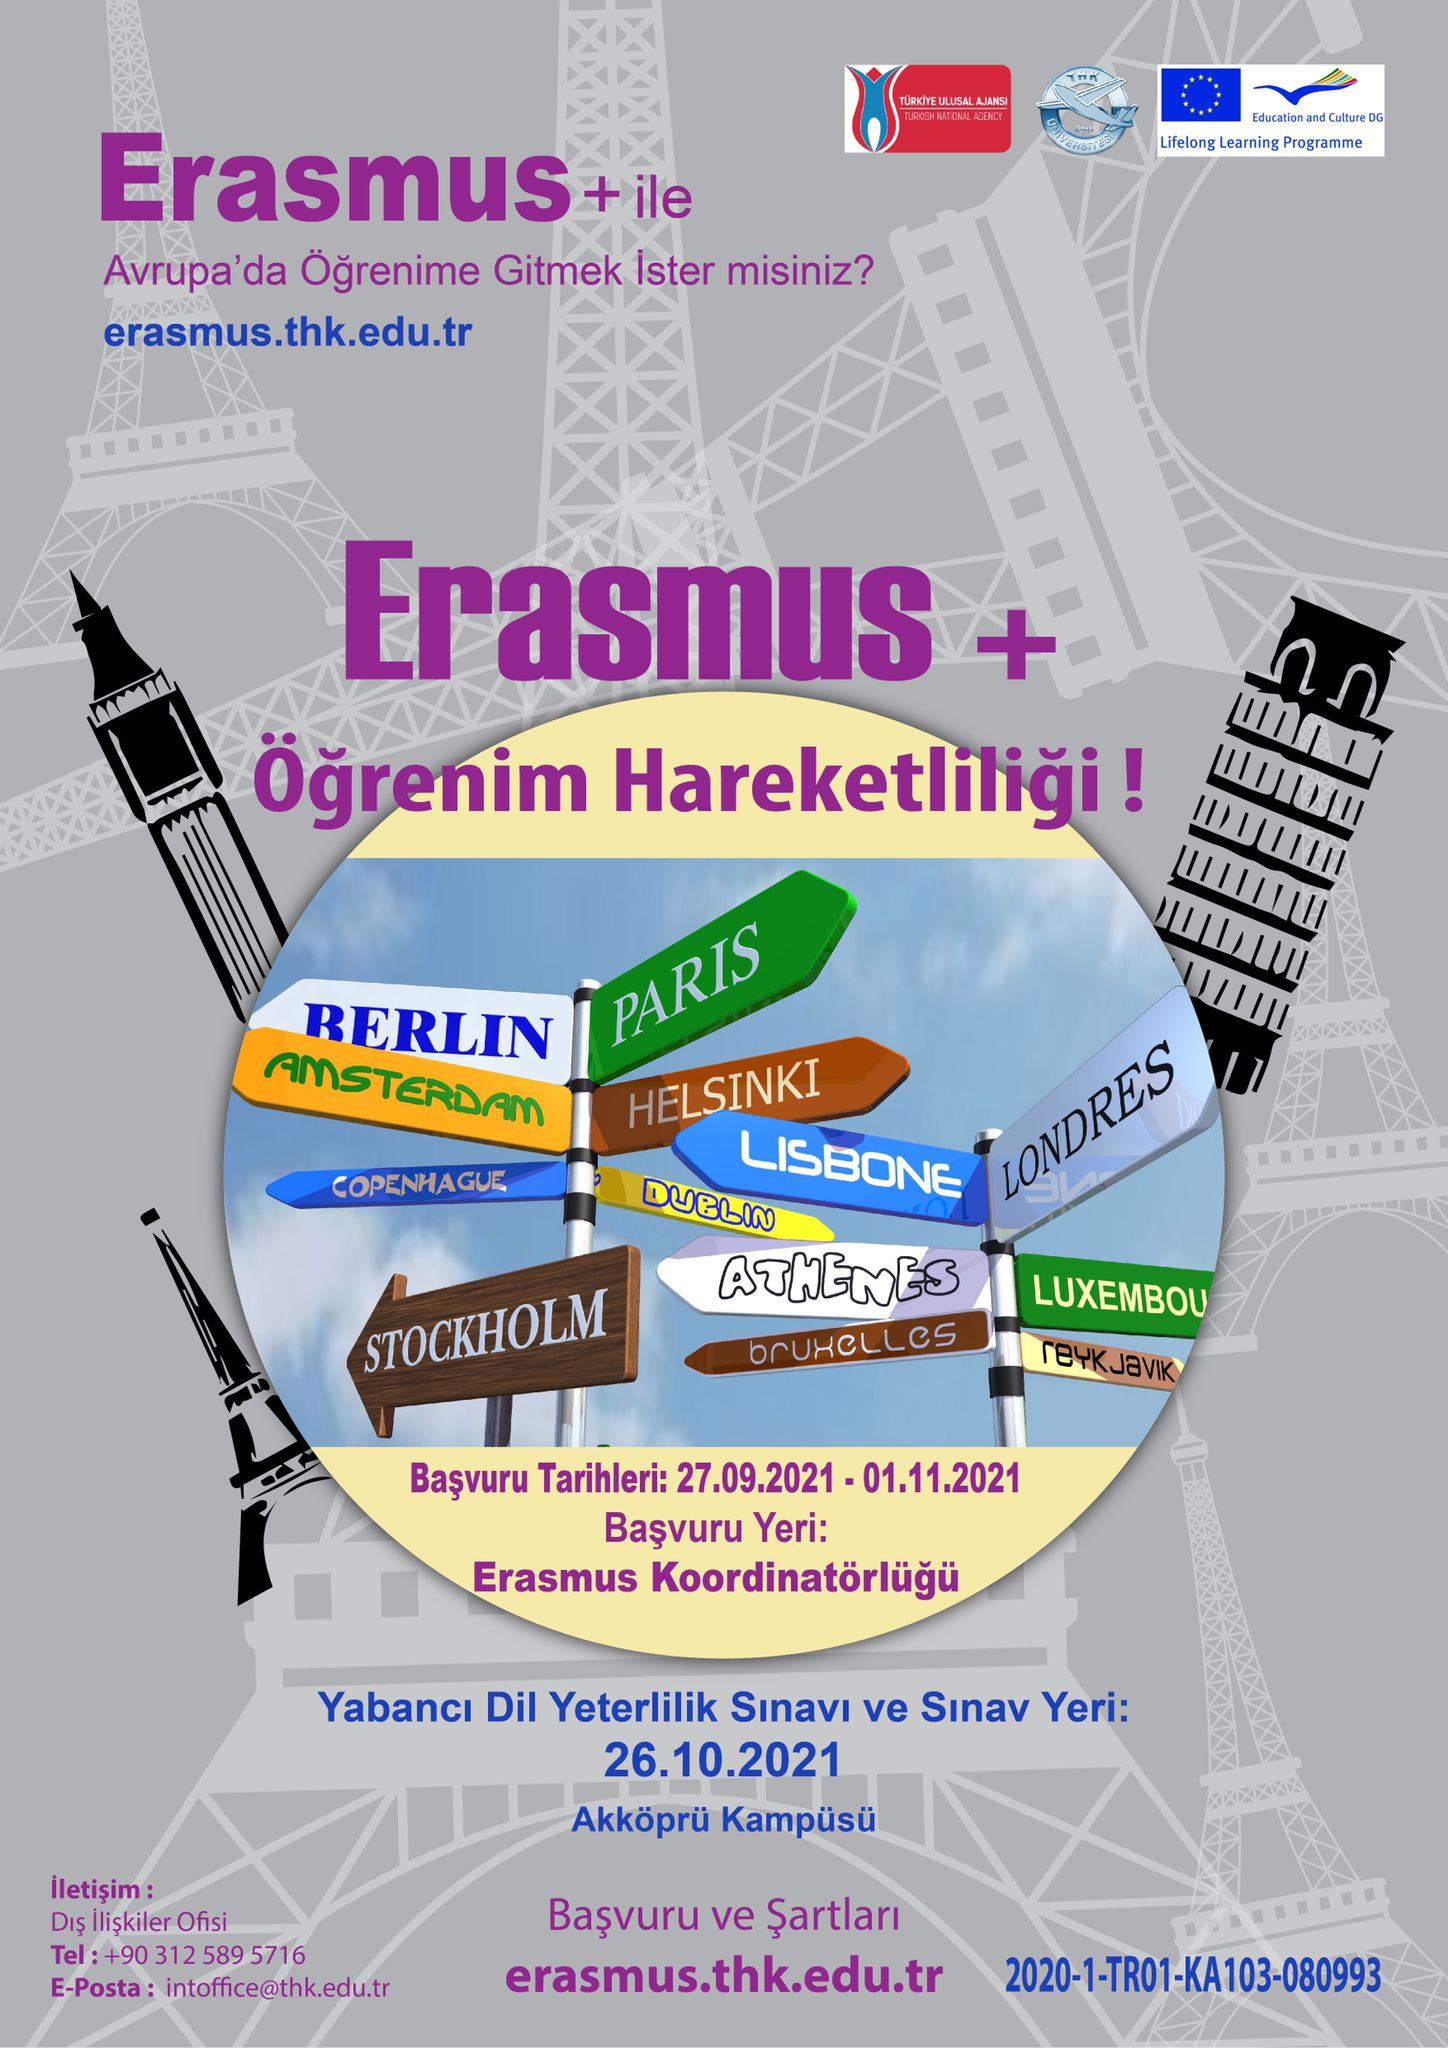 Application for 2021/2022 Spring Term Erasmus Student Mobility Has Started